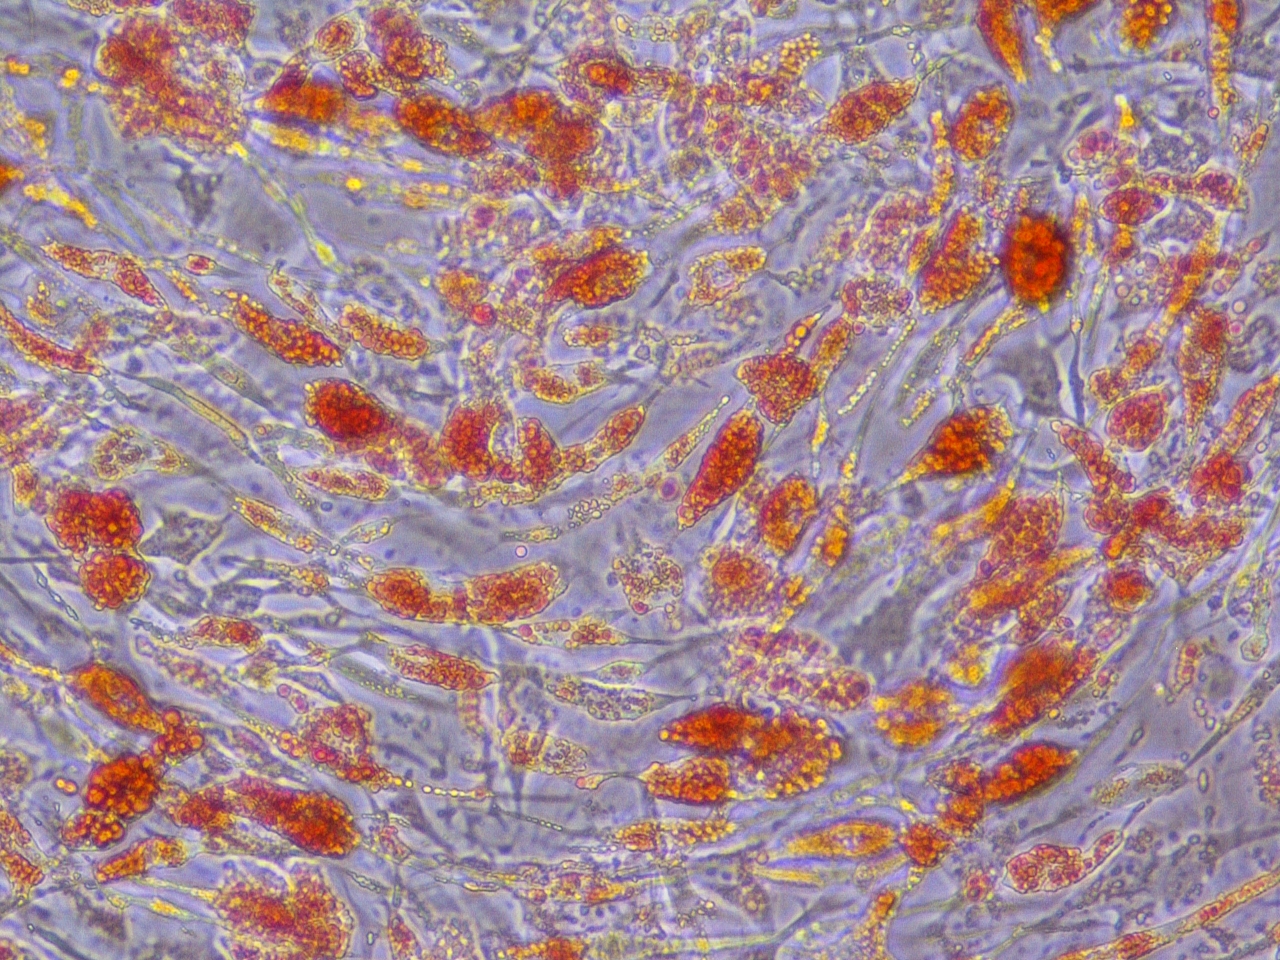 hTERT-immortalized Brown Preadipocytes (ATCC® CRL-4062™) differentiated into brown adipocytes and stained with Oil Red O dye. Micrograph taken with a 20 X objective.